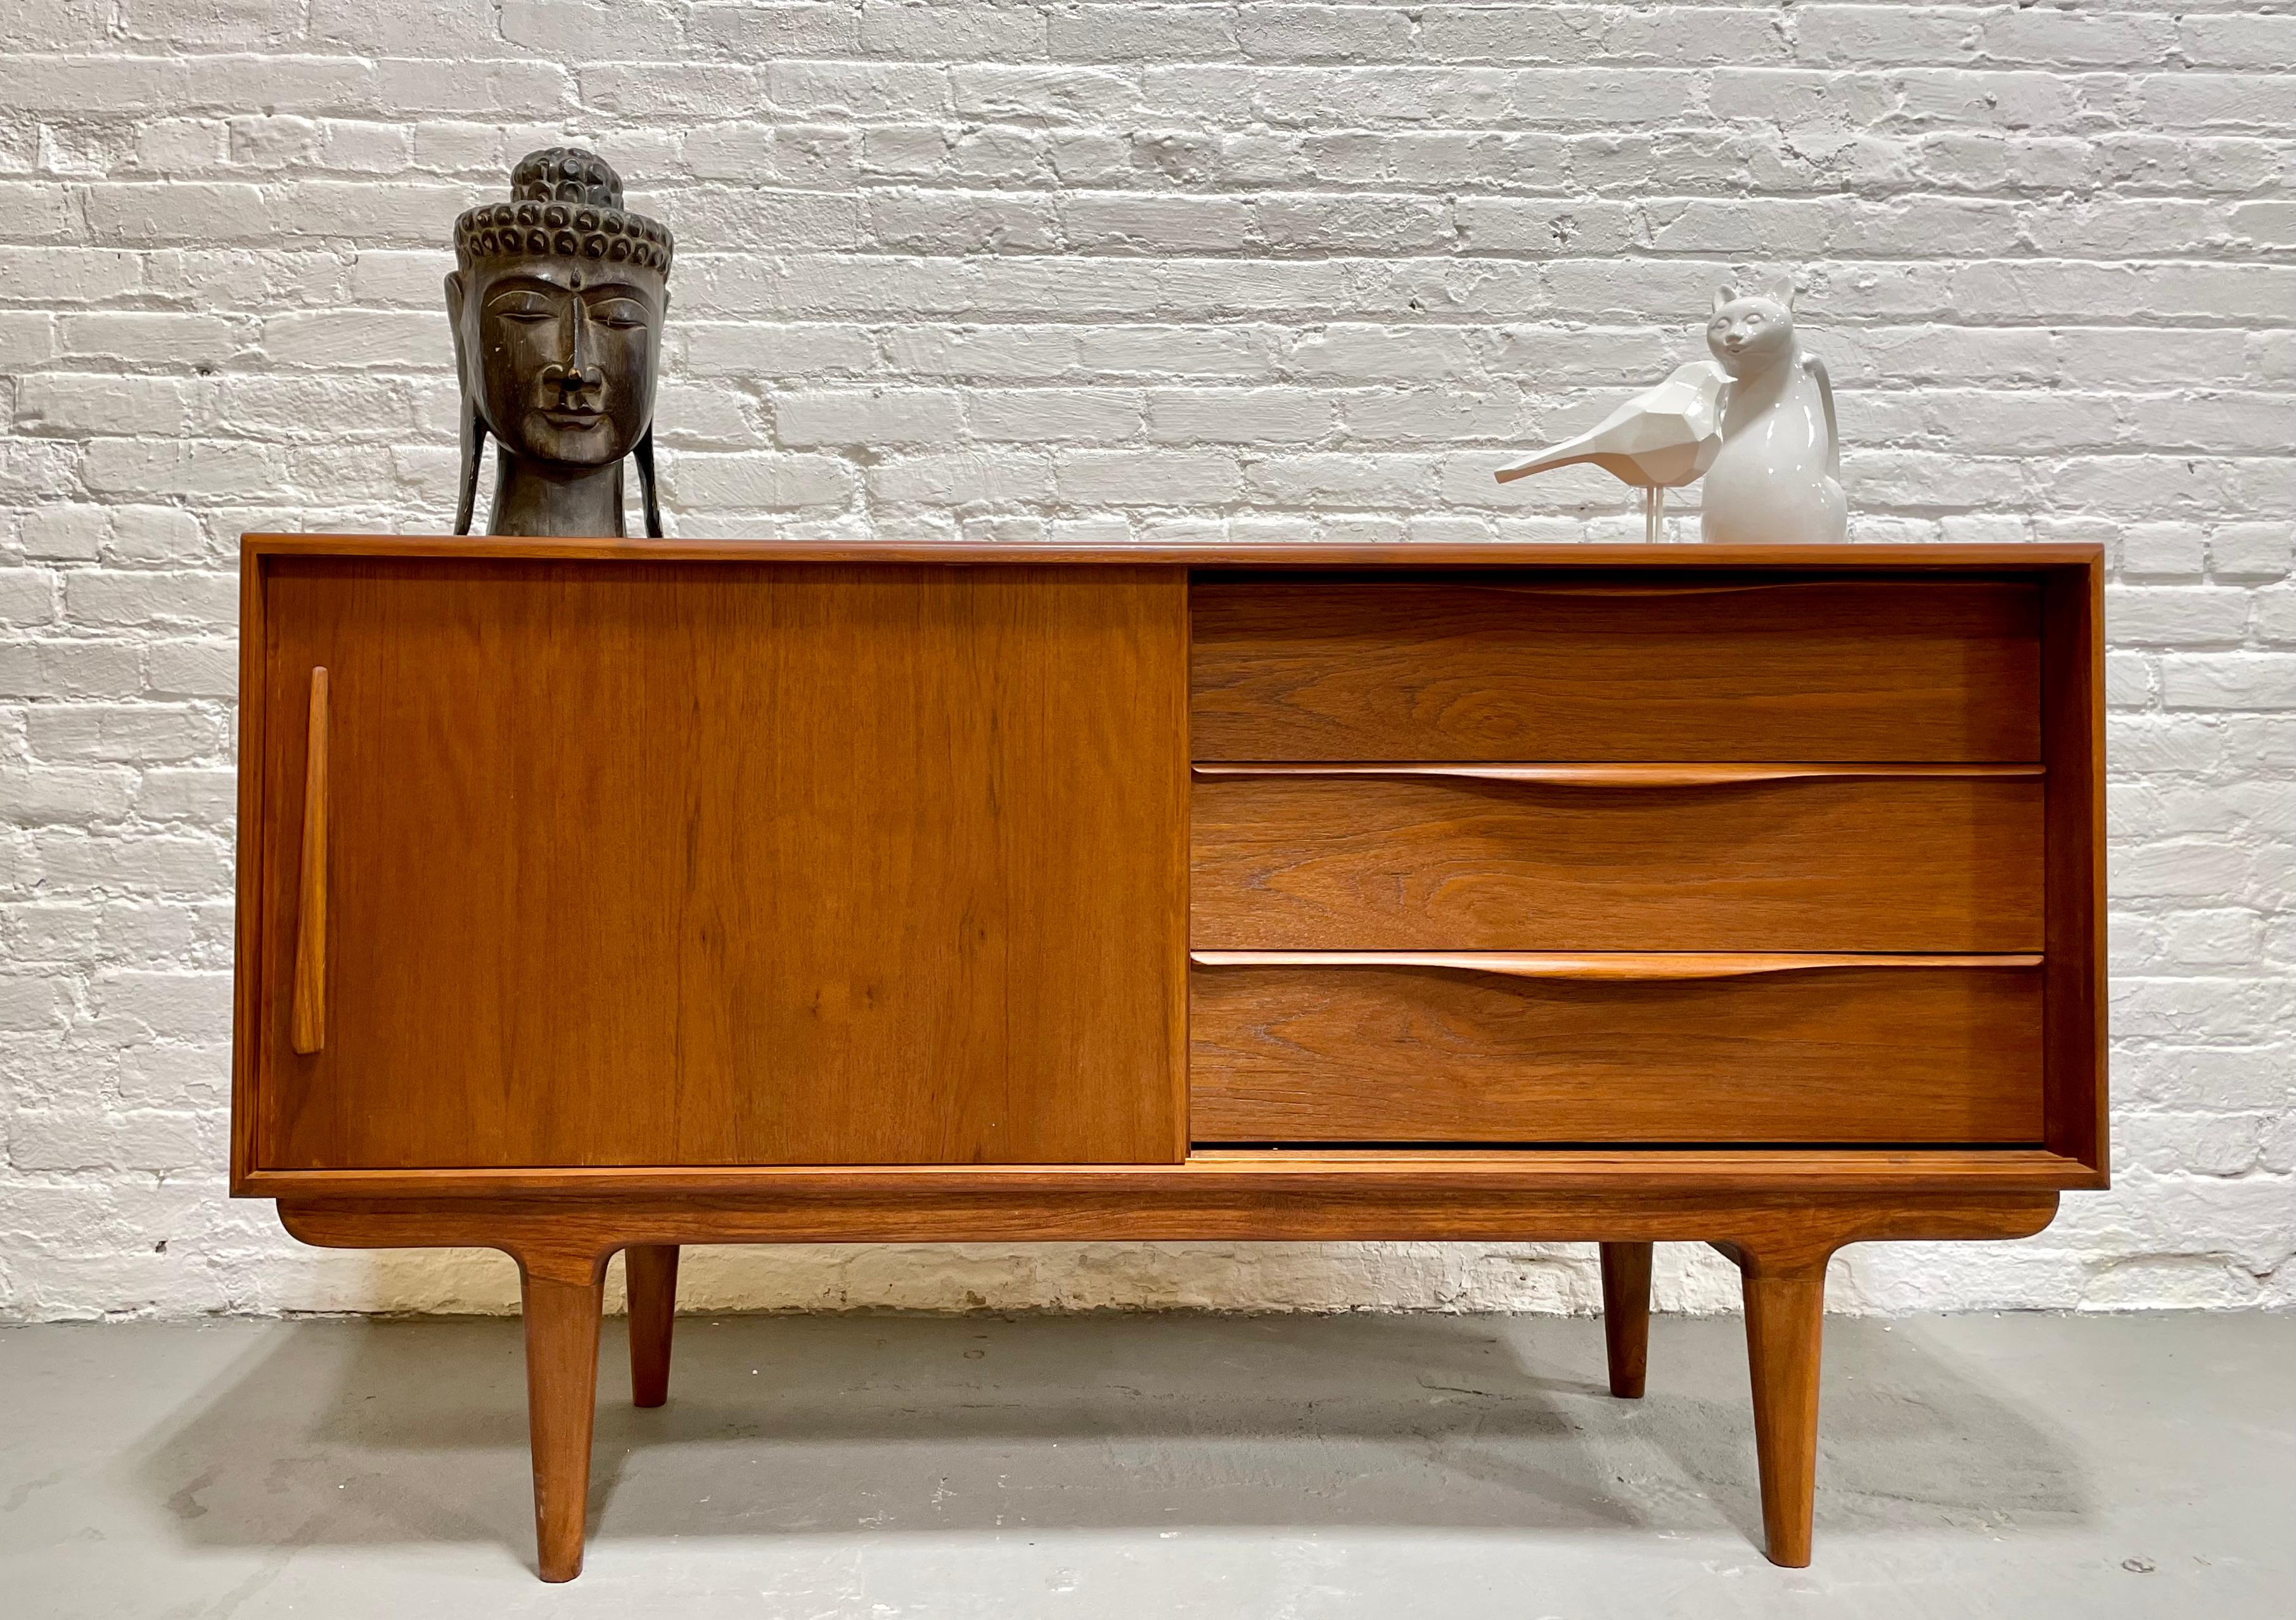 Perfect smaller sized Handmade Mid Century Modern styled credenza / media stand with superb leg design. Thoughtful layout for a media stand - shelving for components along one side and streamlined drawers for remotes and other storage on the other